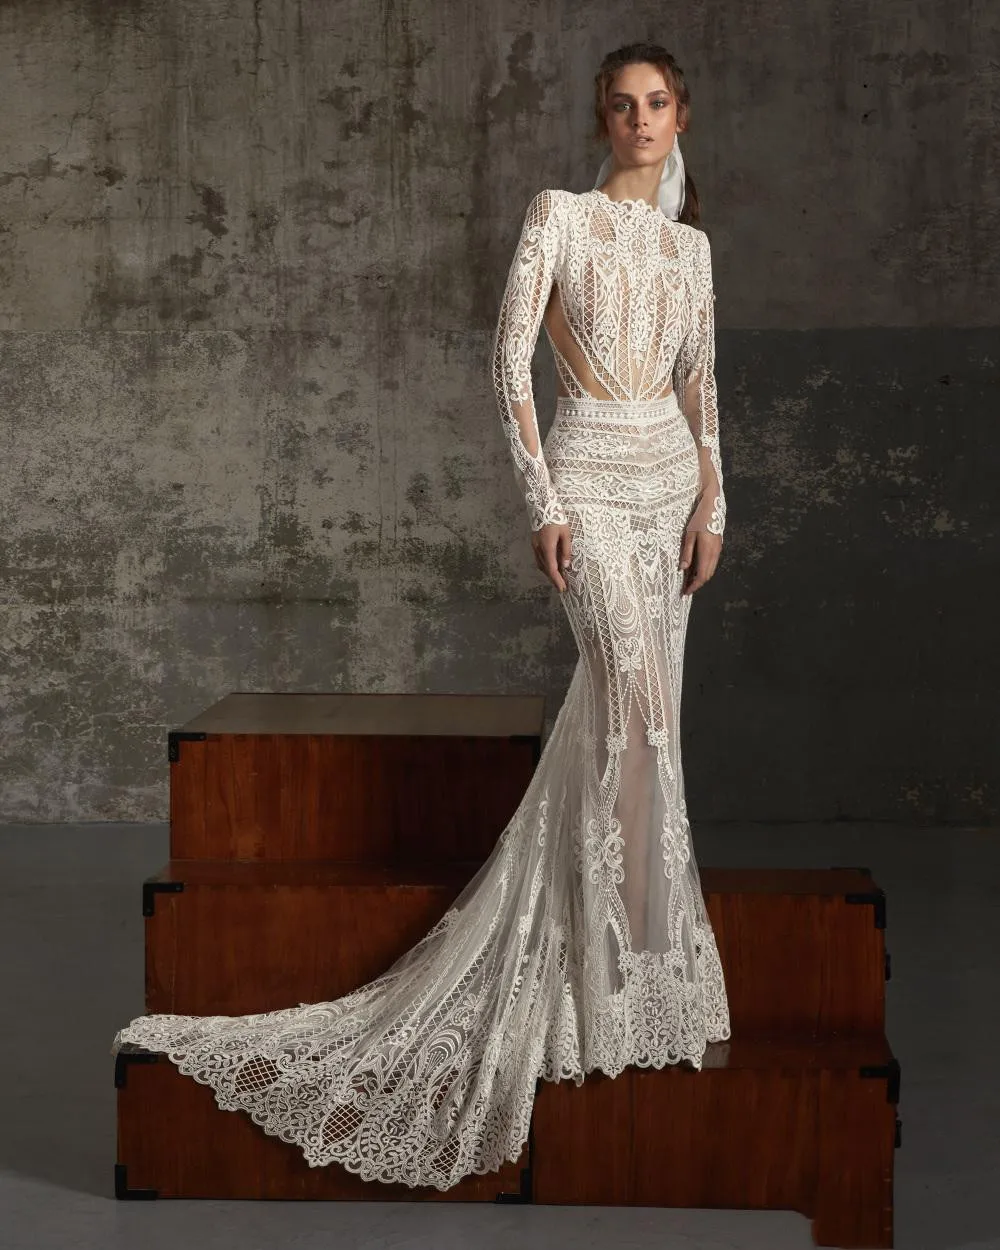 

Bohemian Mermaid Wedding Dresses Jewel Neck Long Sleeve Lace Appliques Country Bridal Gowns Illusion Beach Wedding Dress